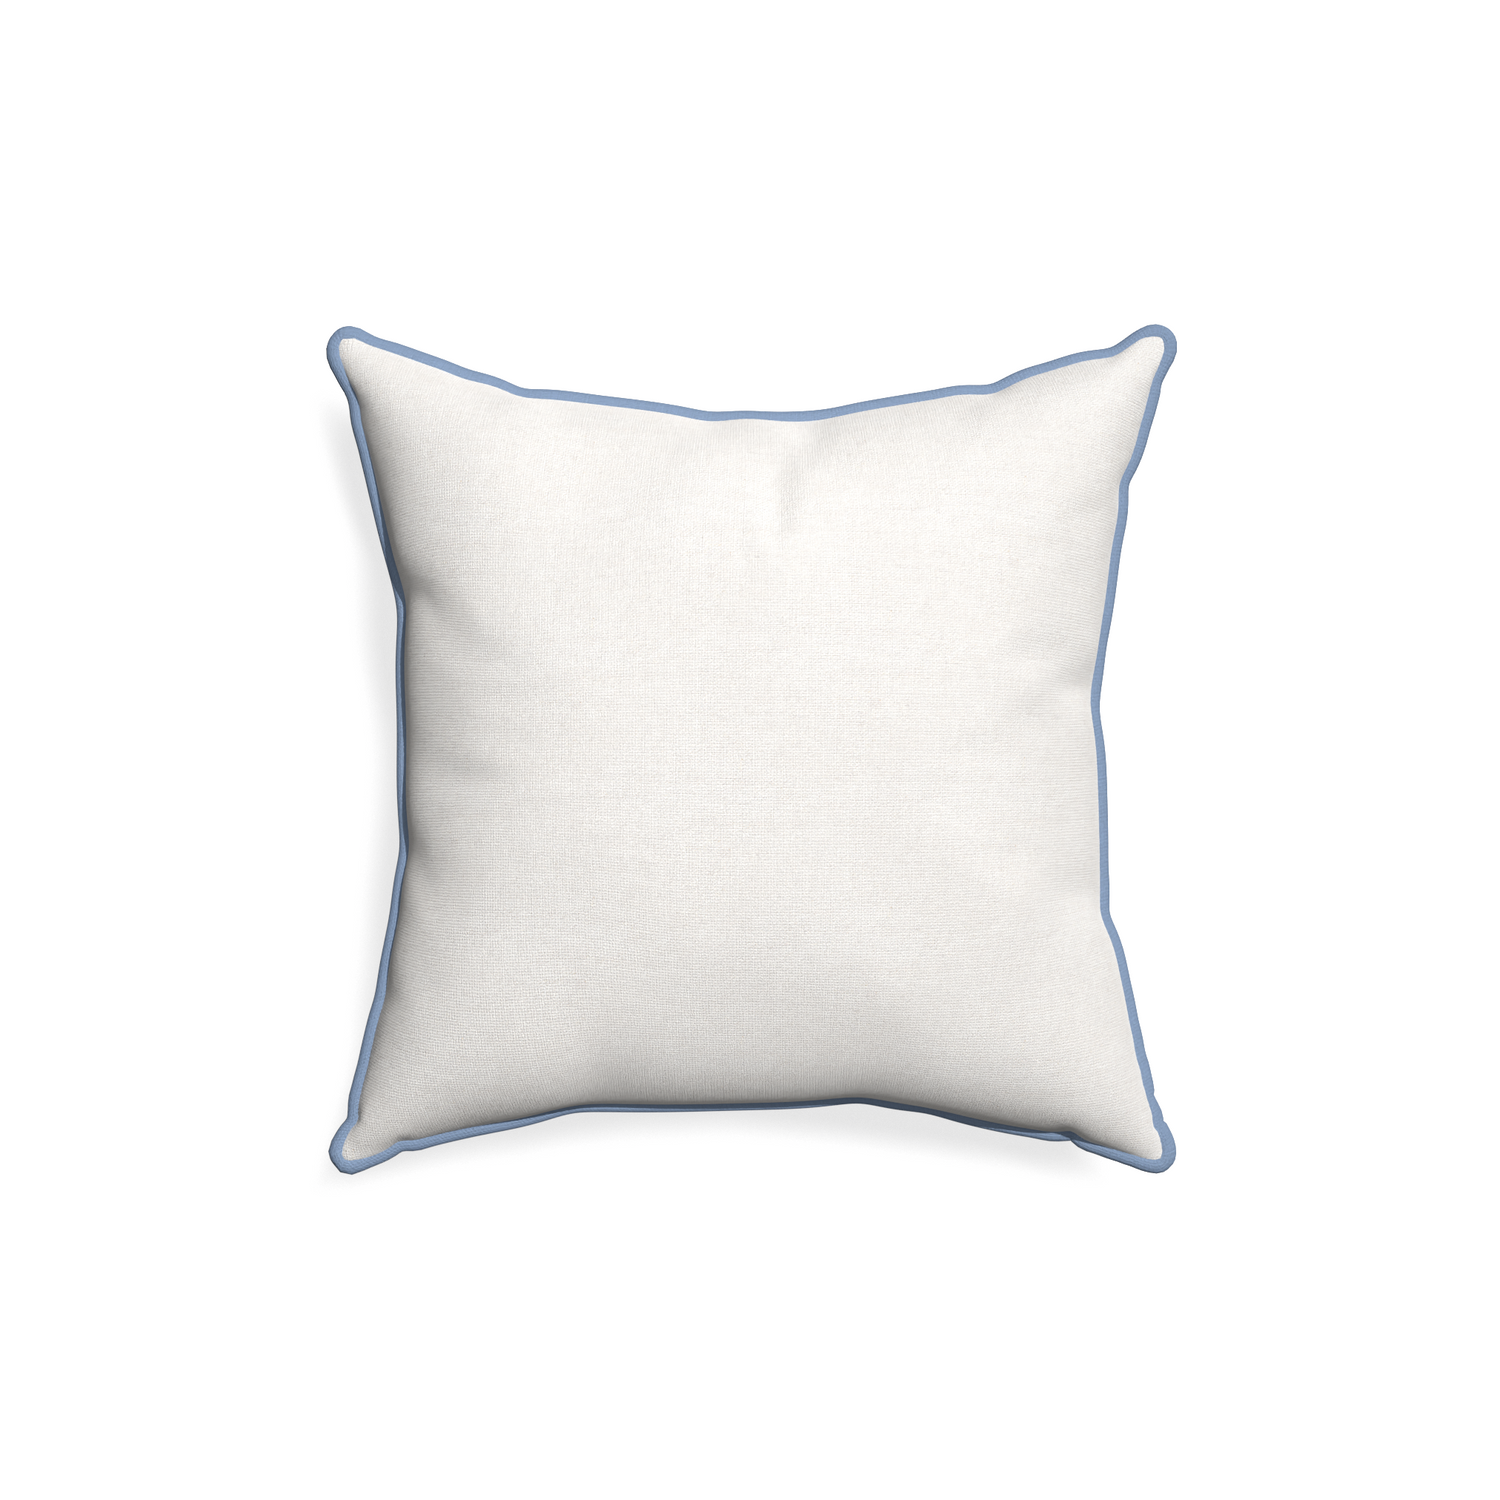 18-square flour custom pillow with sky piping on white background